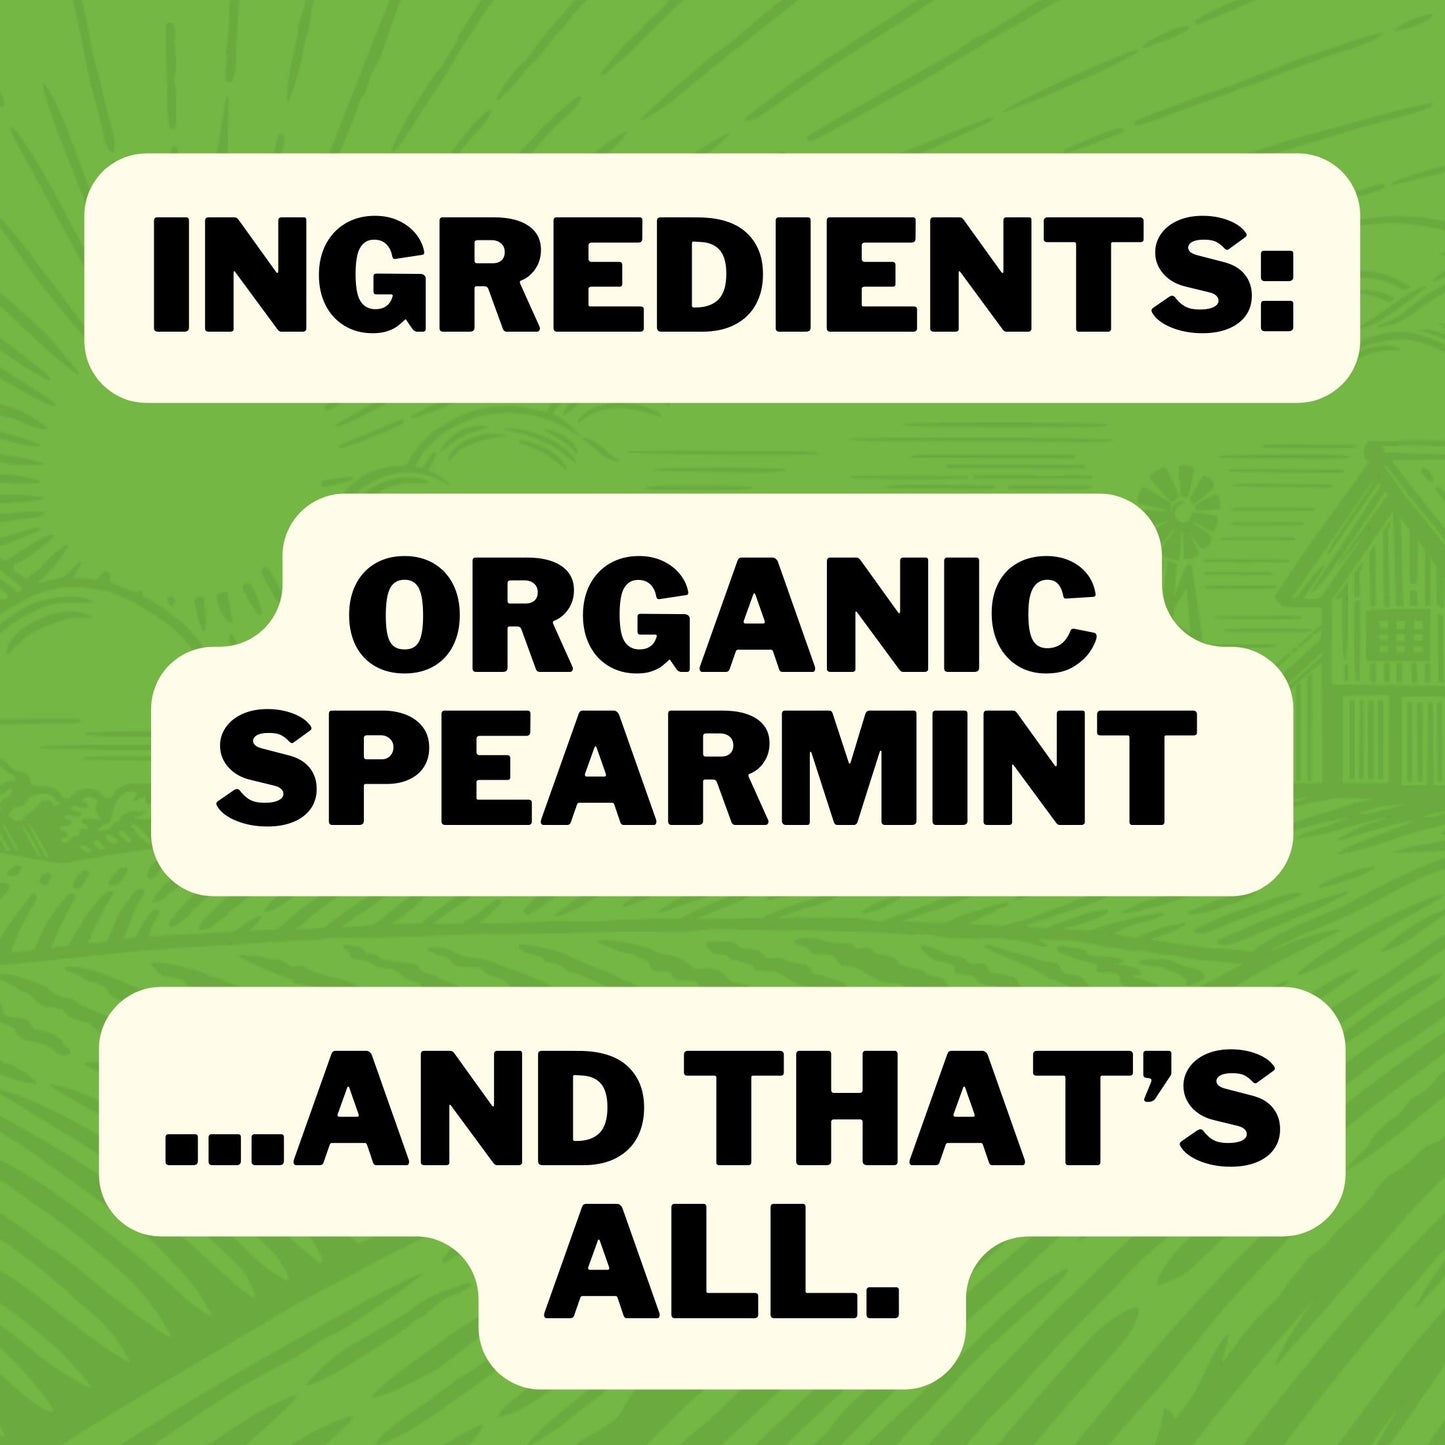 Ingredients : Organic Spearmint... And that's all.